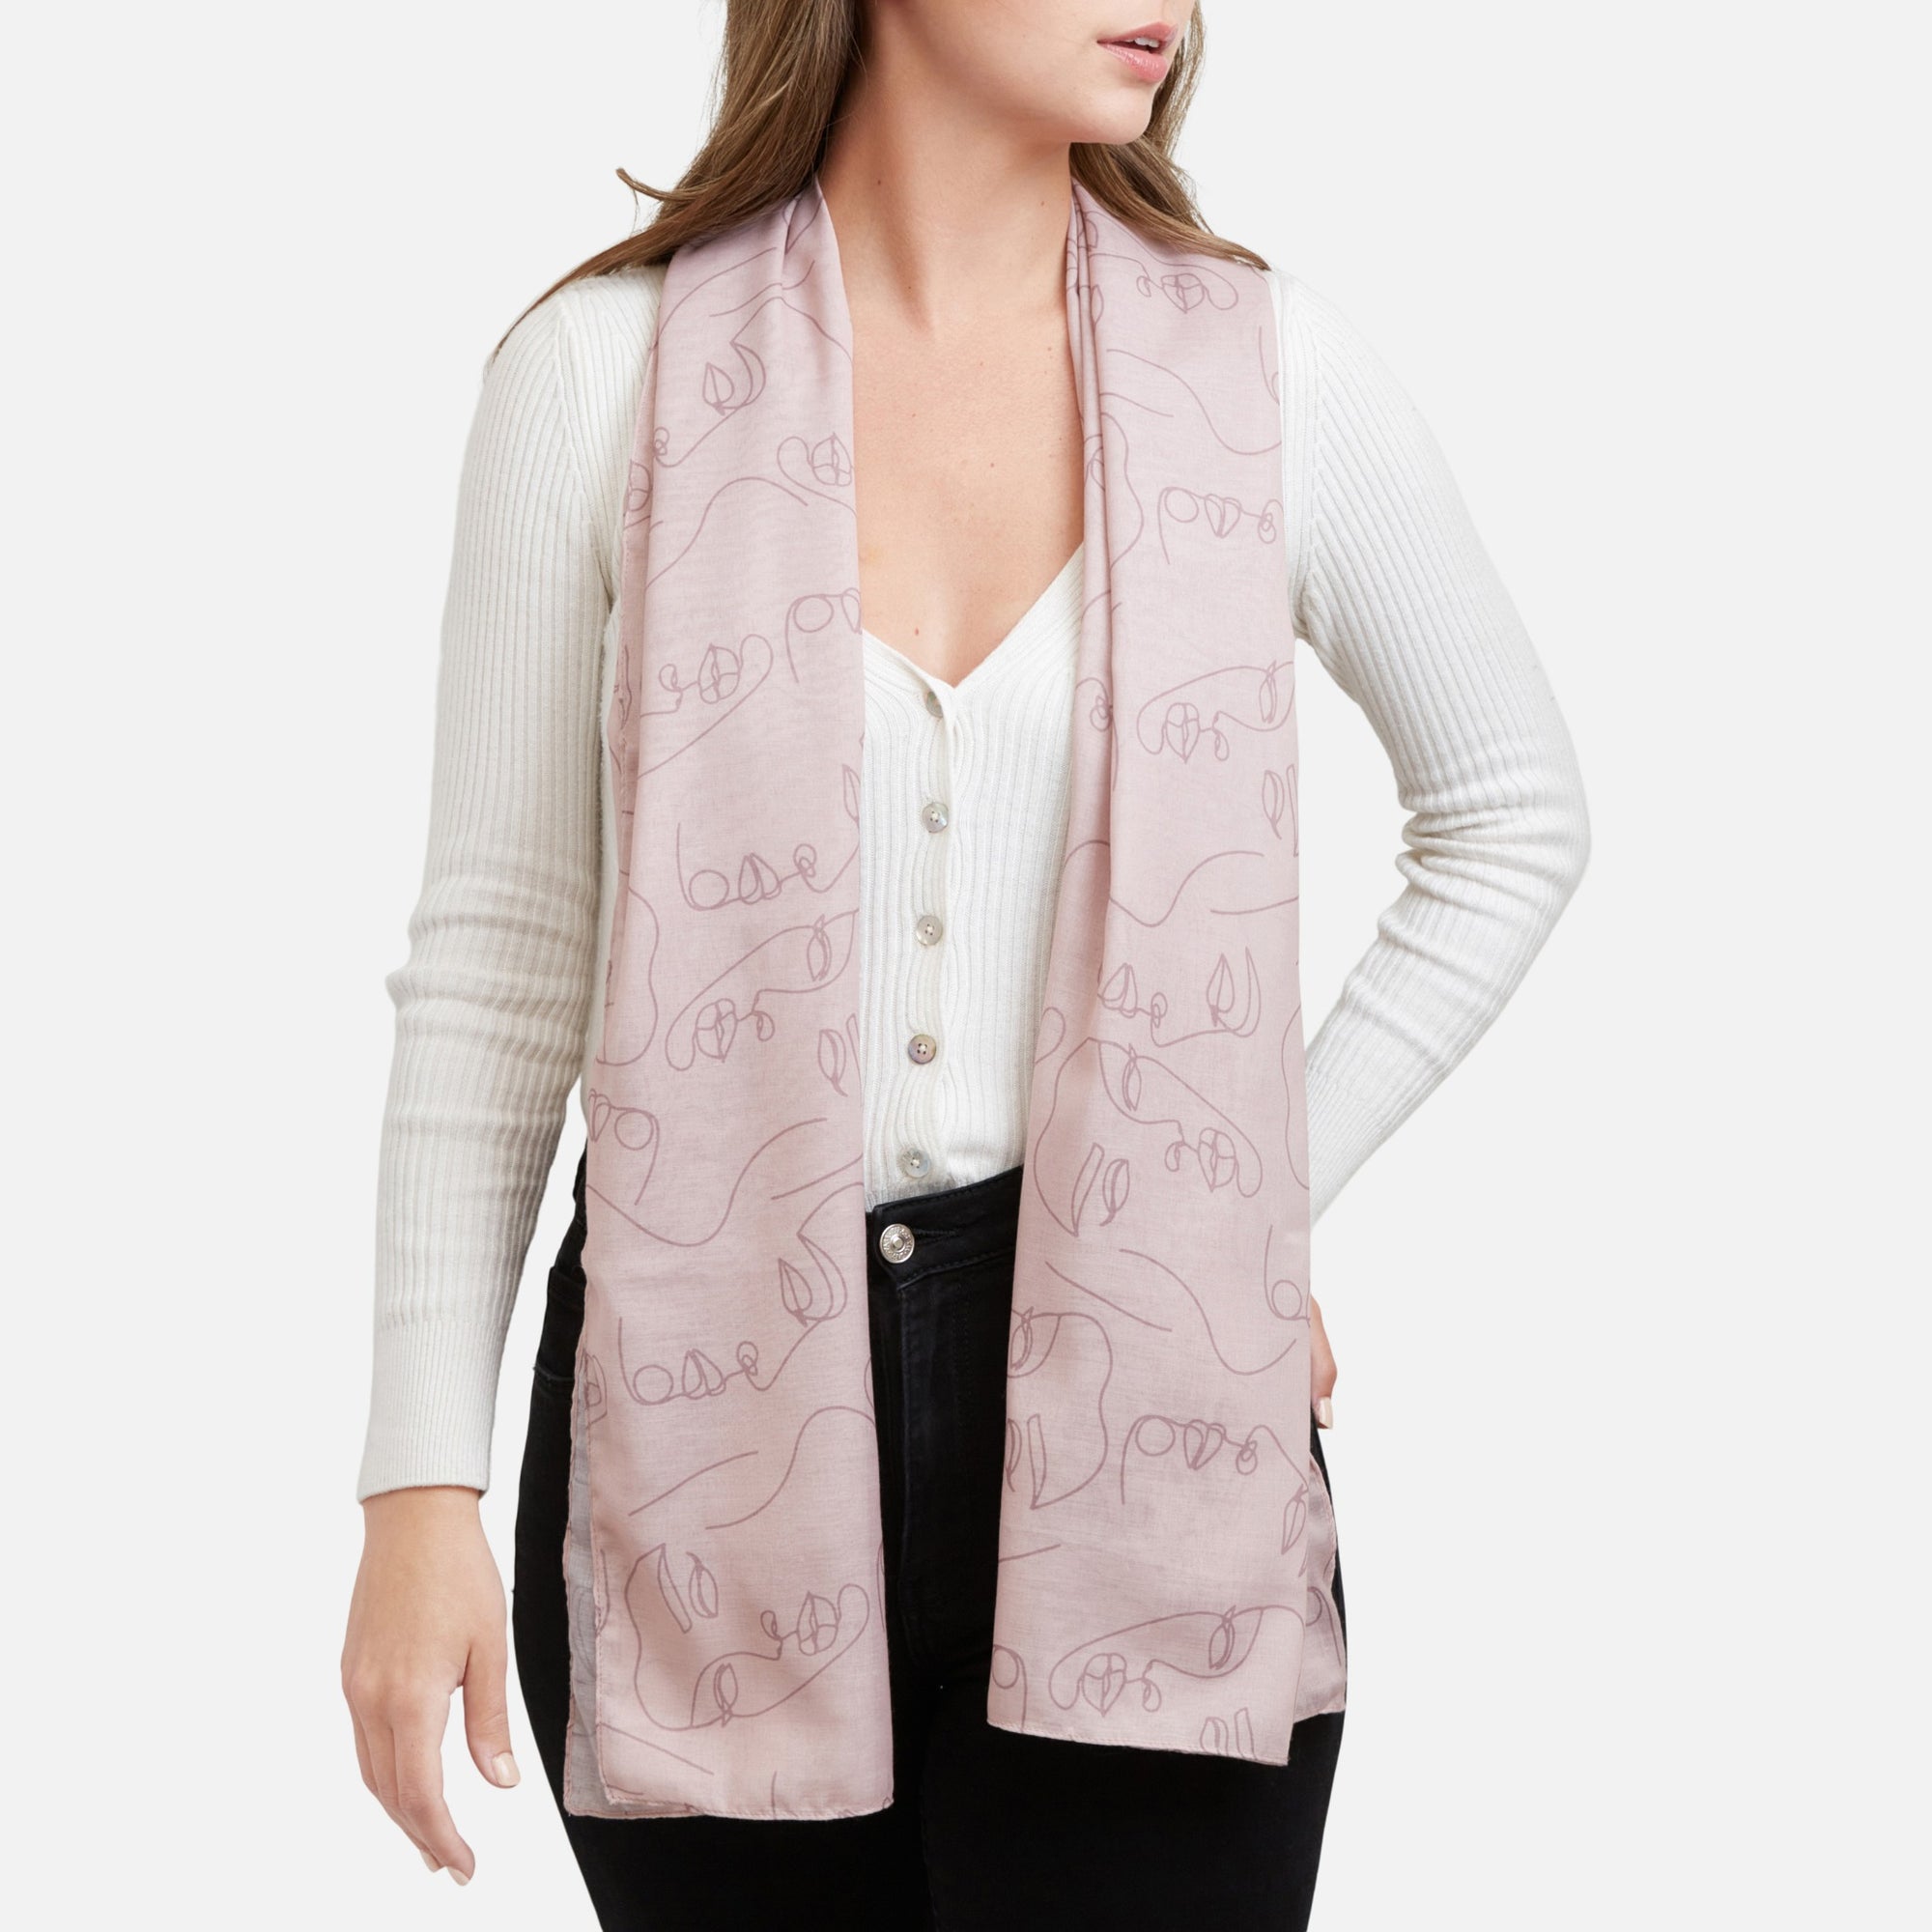 Pale pink rectangle scarf with abstract faces